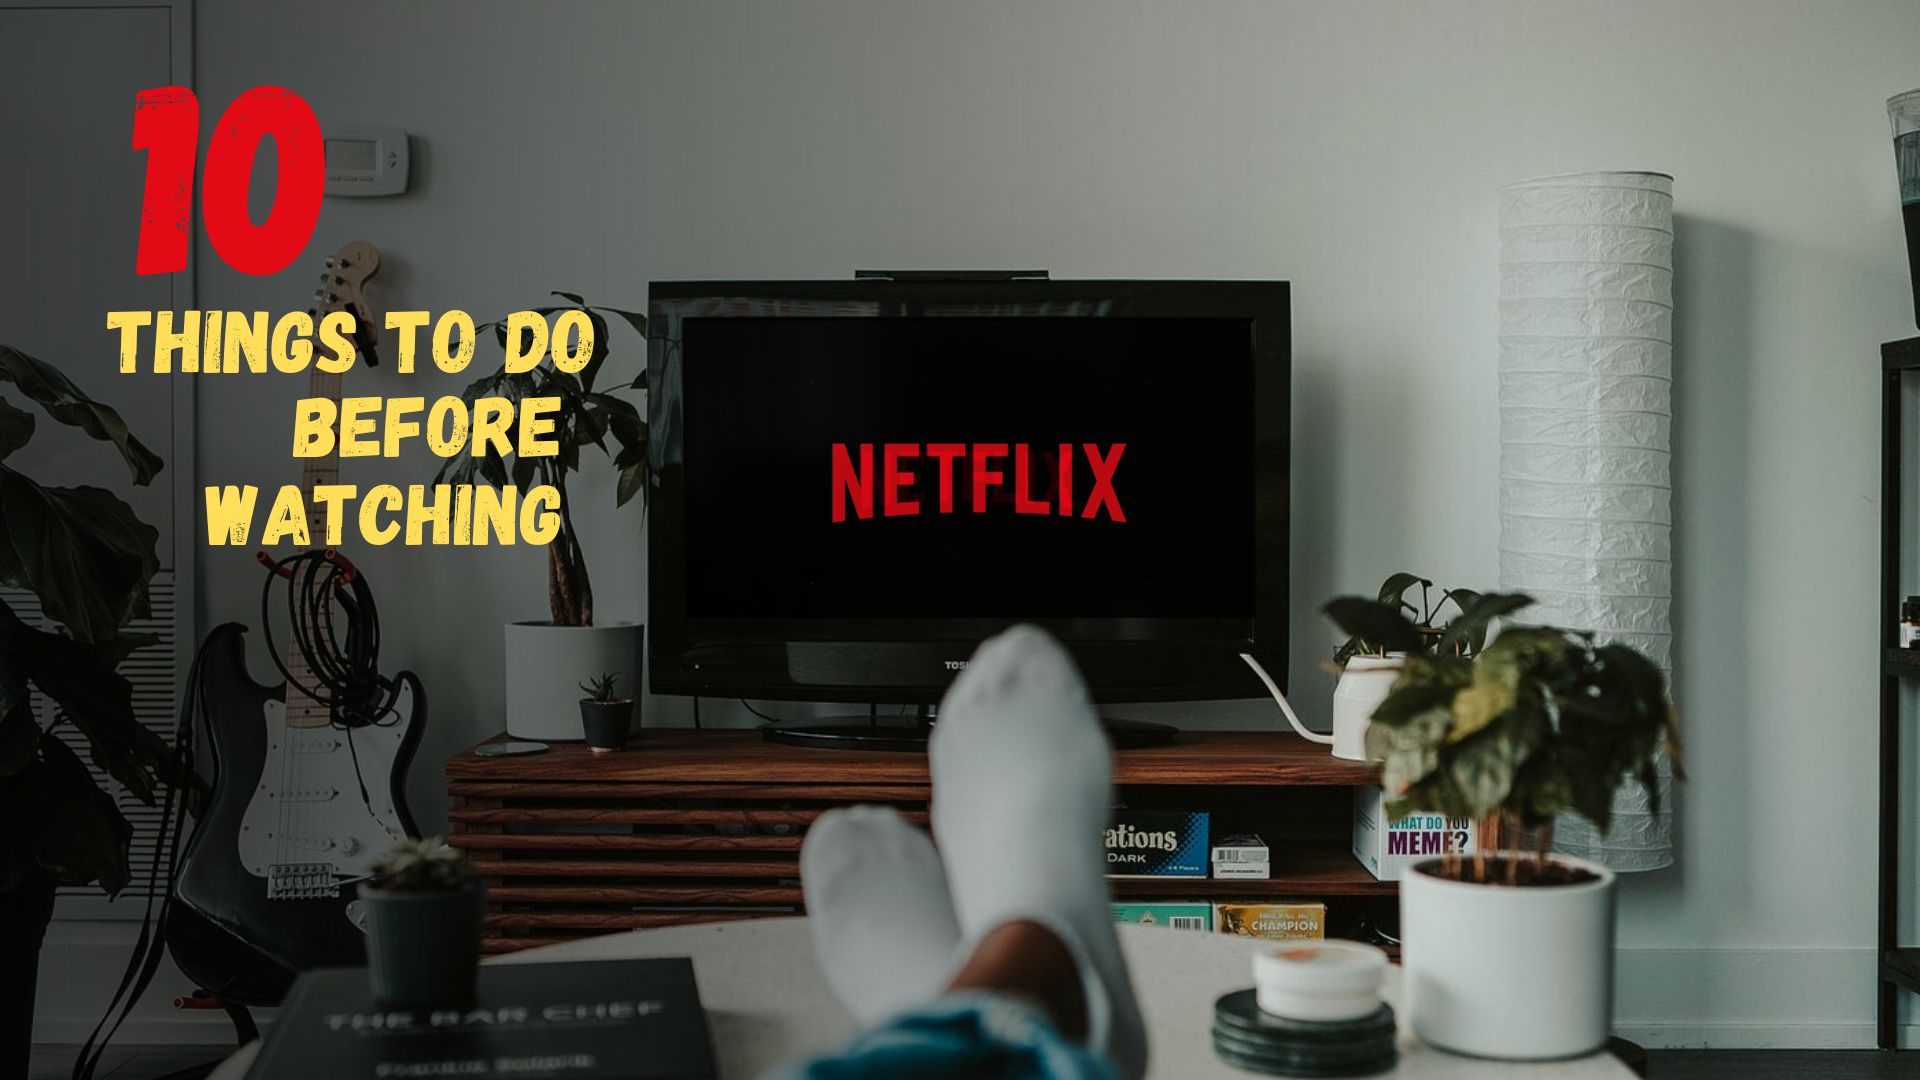 10 Things to Do Before Watching Netflix for a Better Experience